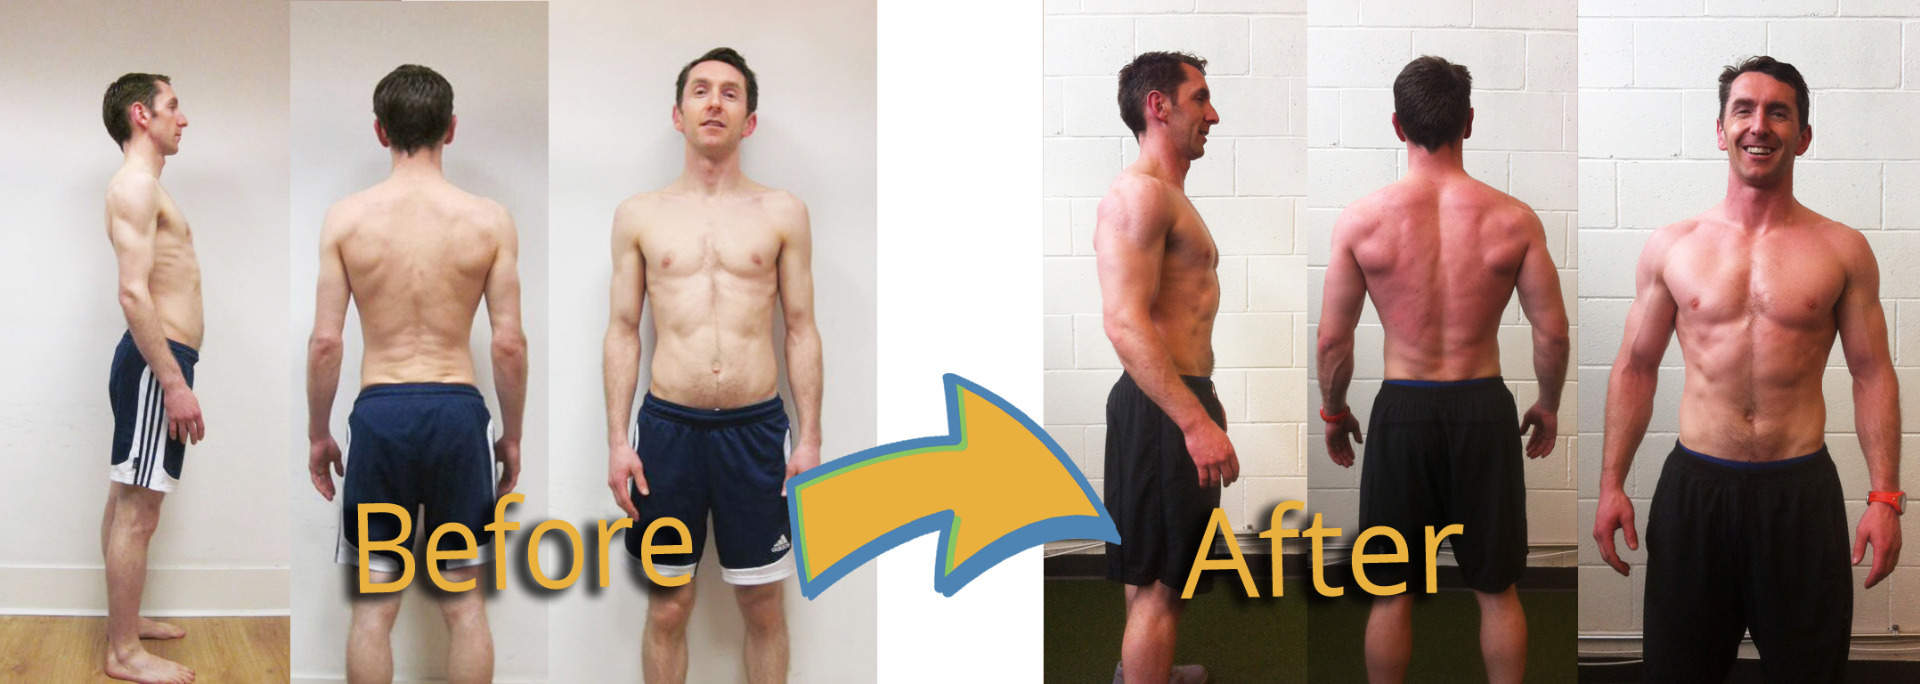 Strength and conditioning training - Before and after images of Leo Ryan